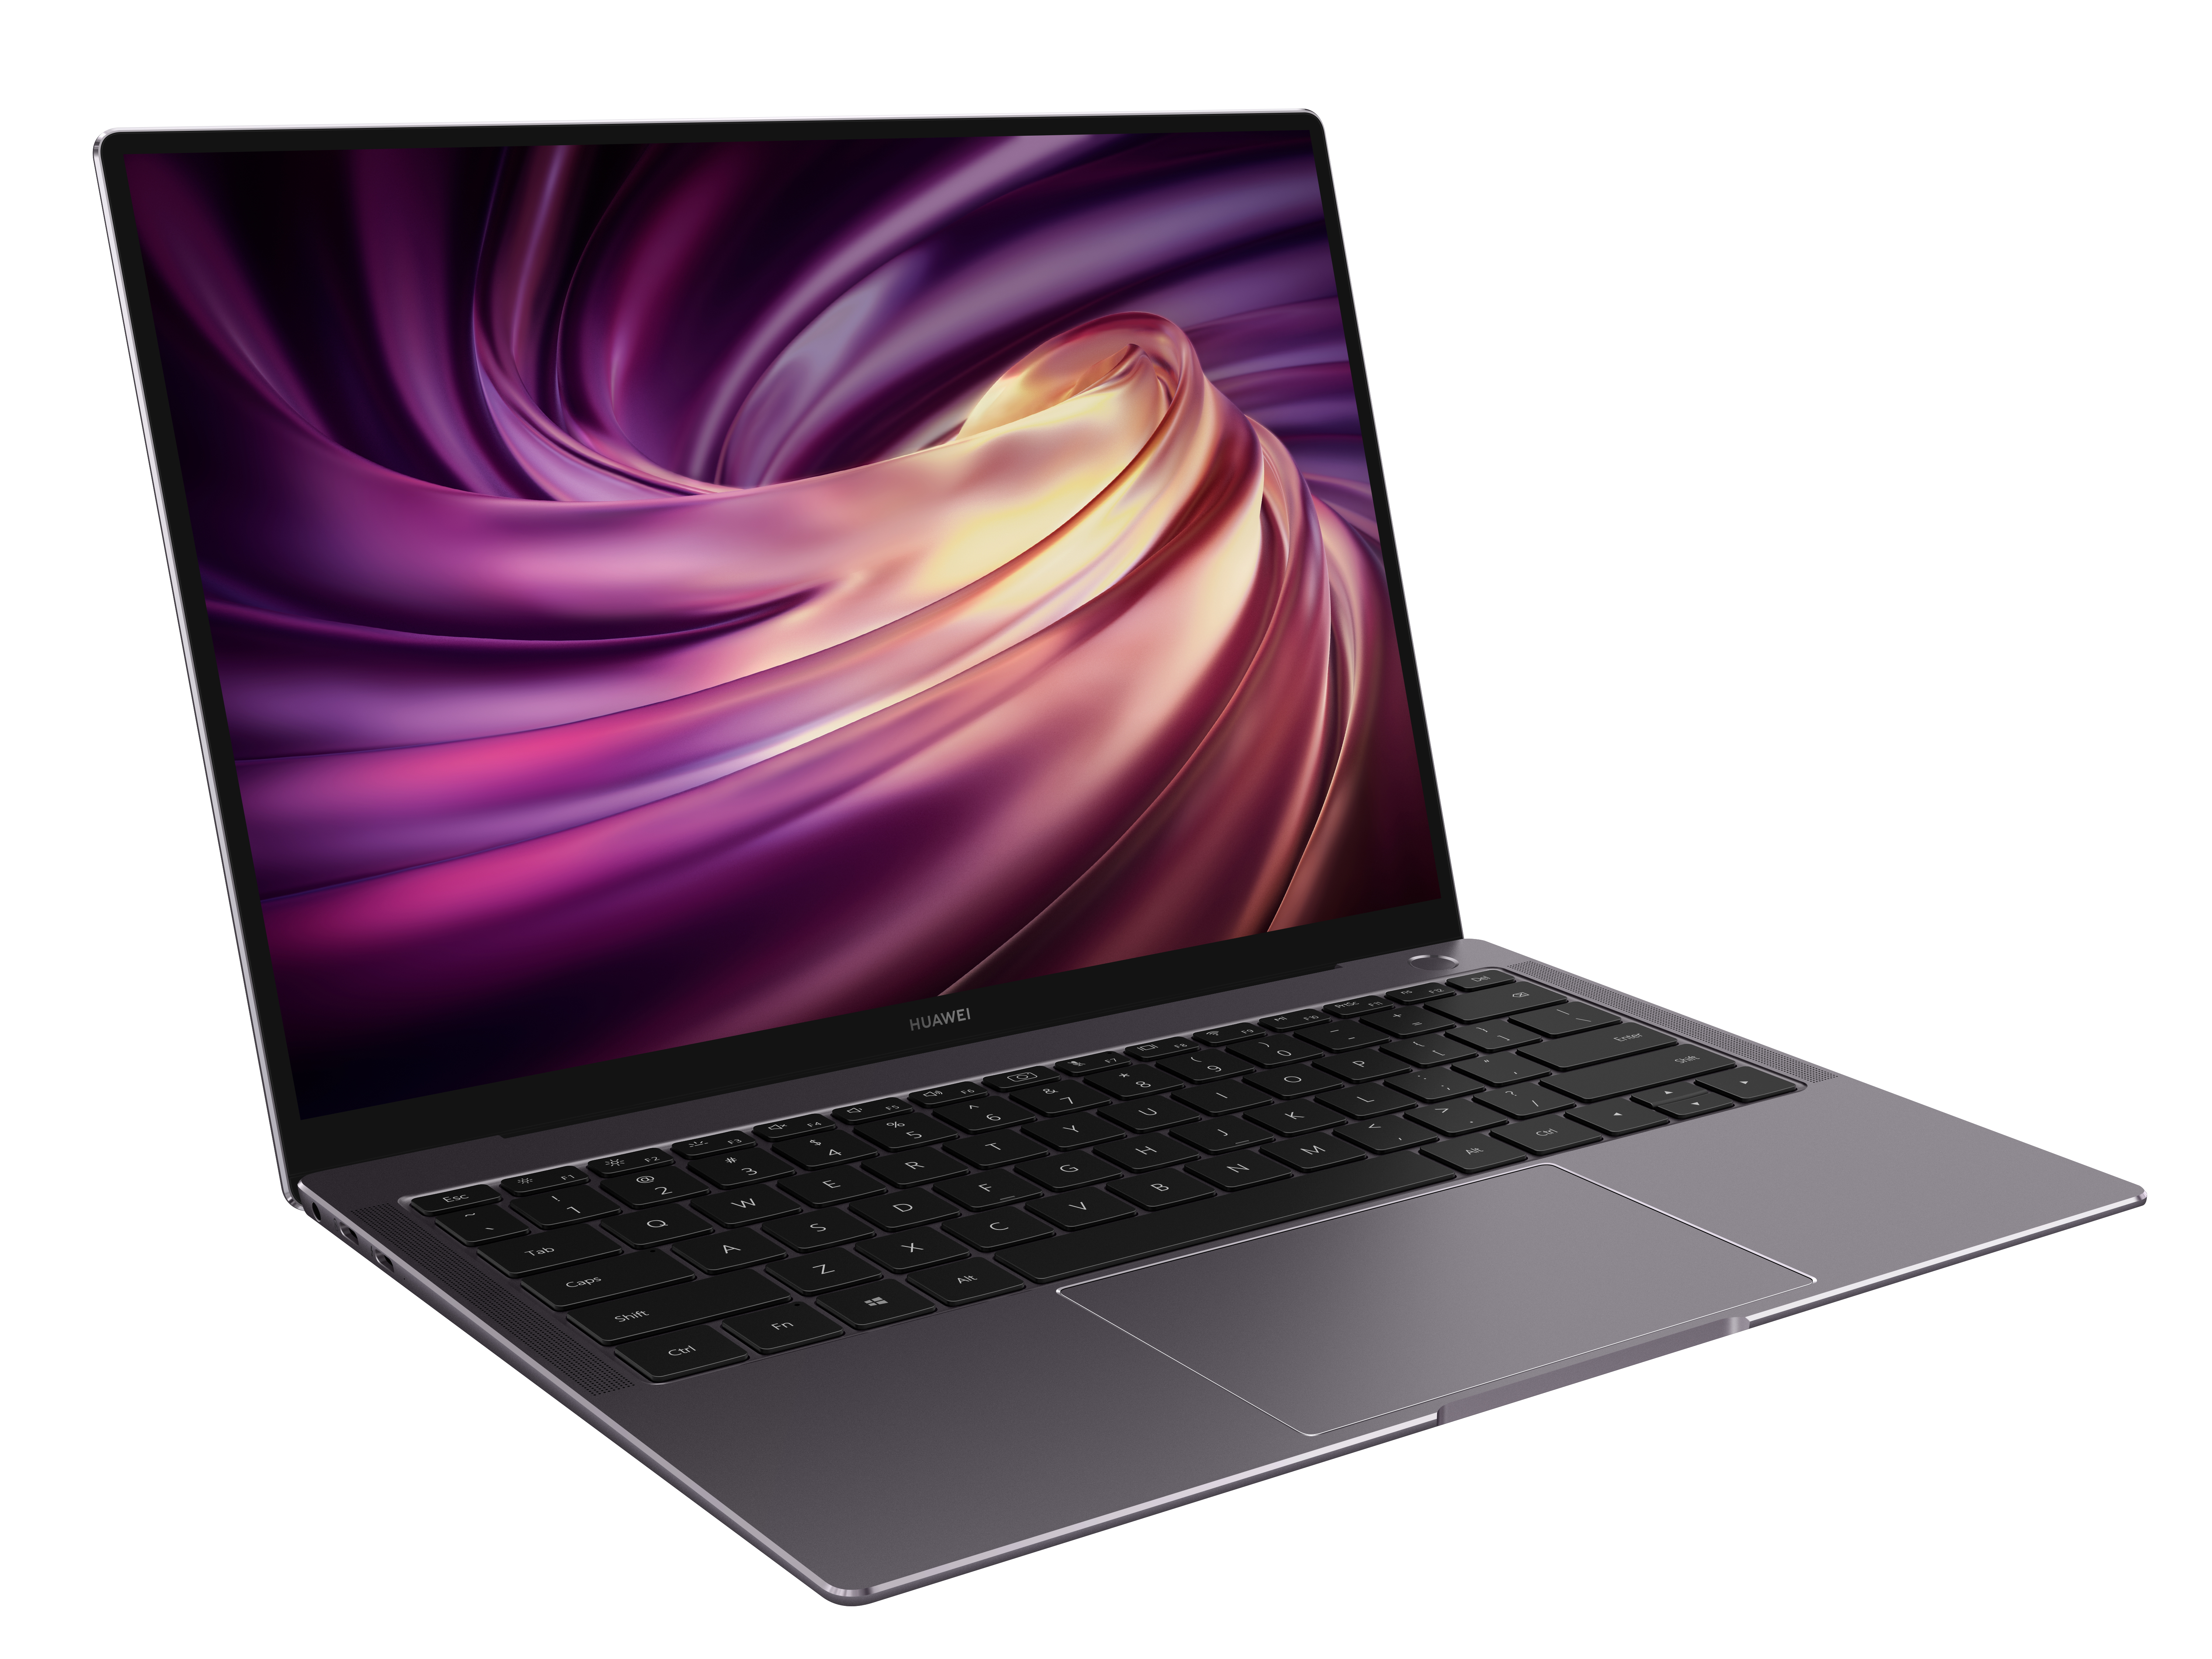 Huawei MateBook X Pro 2020 in Review – Compact Laptop with